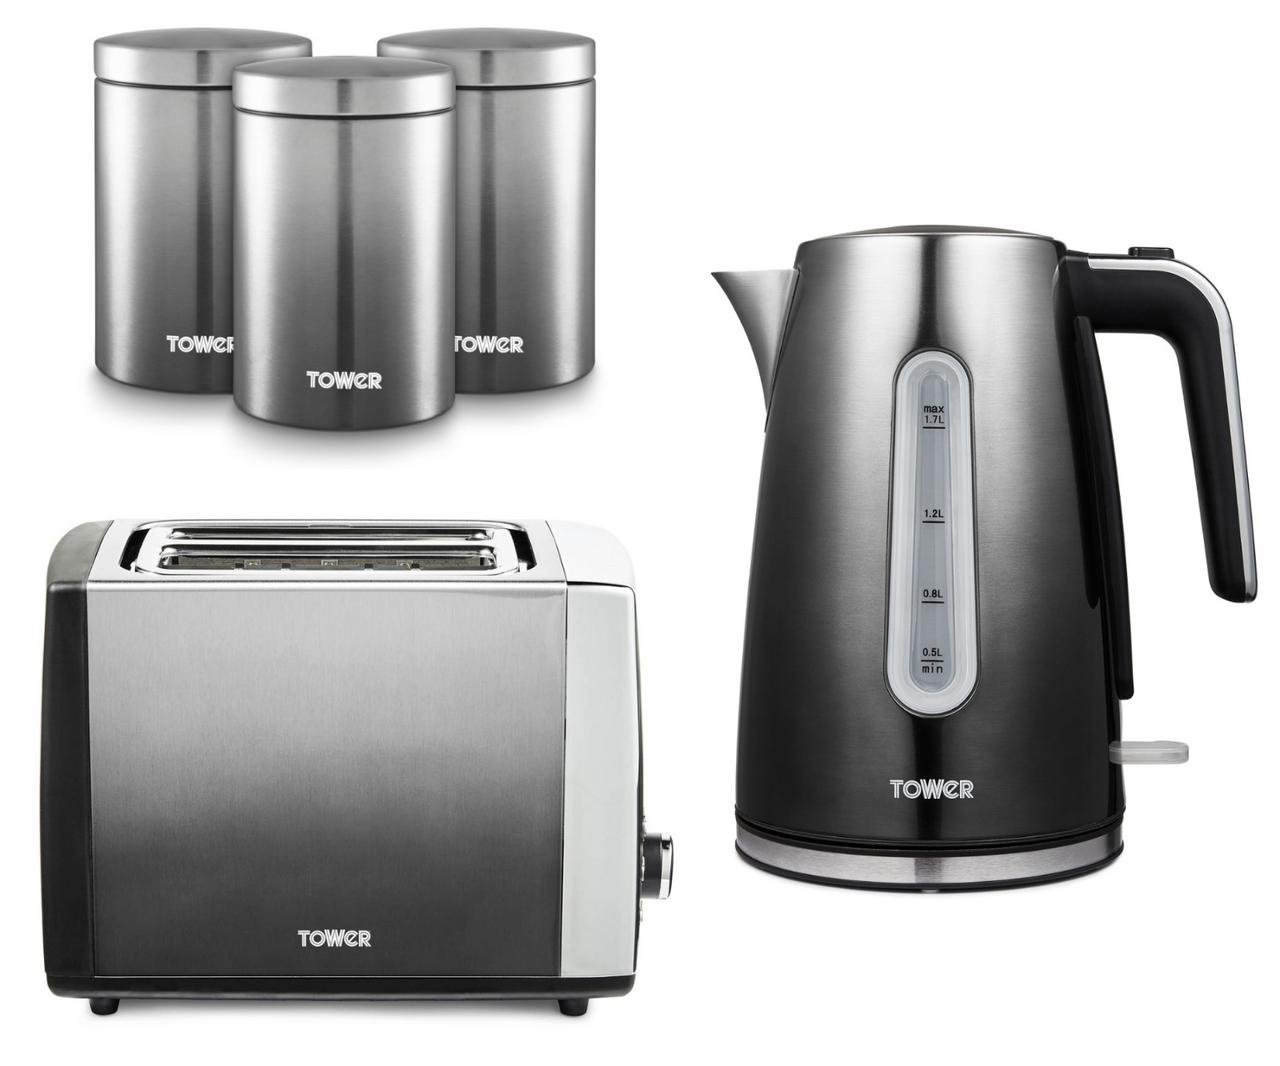 Tower Infinity Ombre Kettle, 2 Slice Toaster & 3 Canisters Matching Set in Graphite Grey